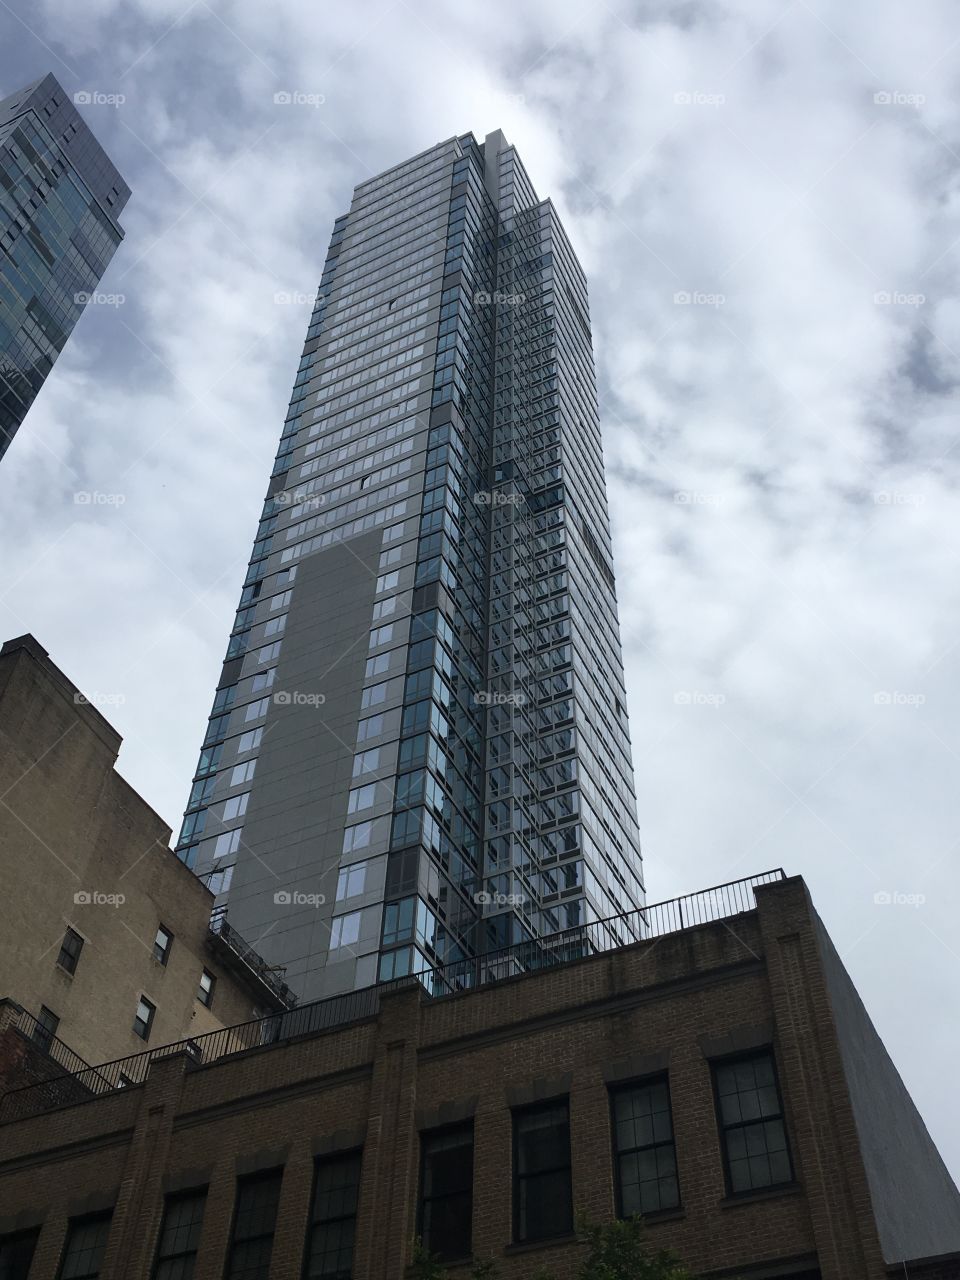 Picture of a tall building 